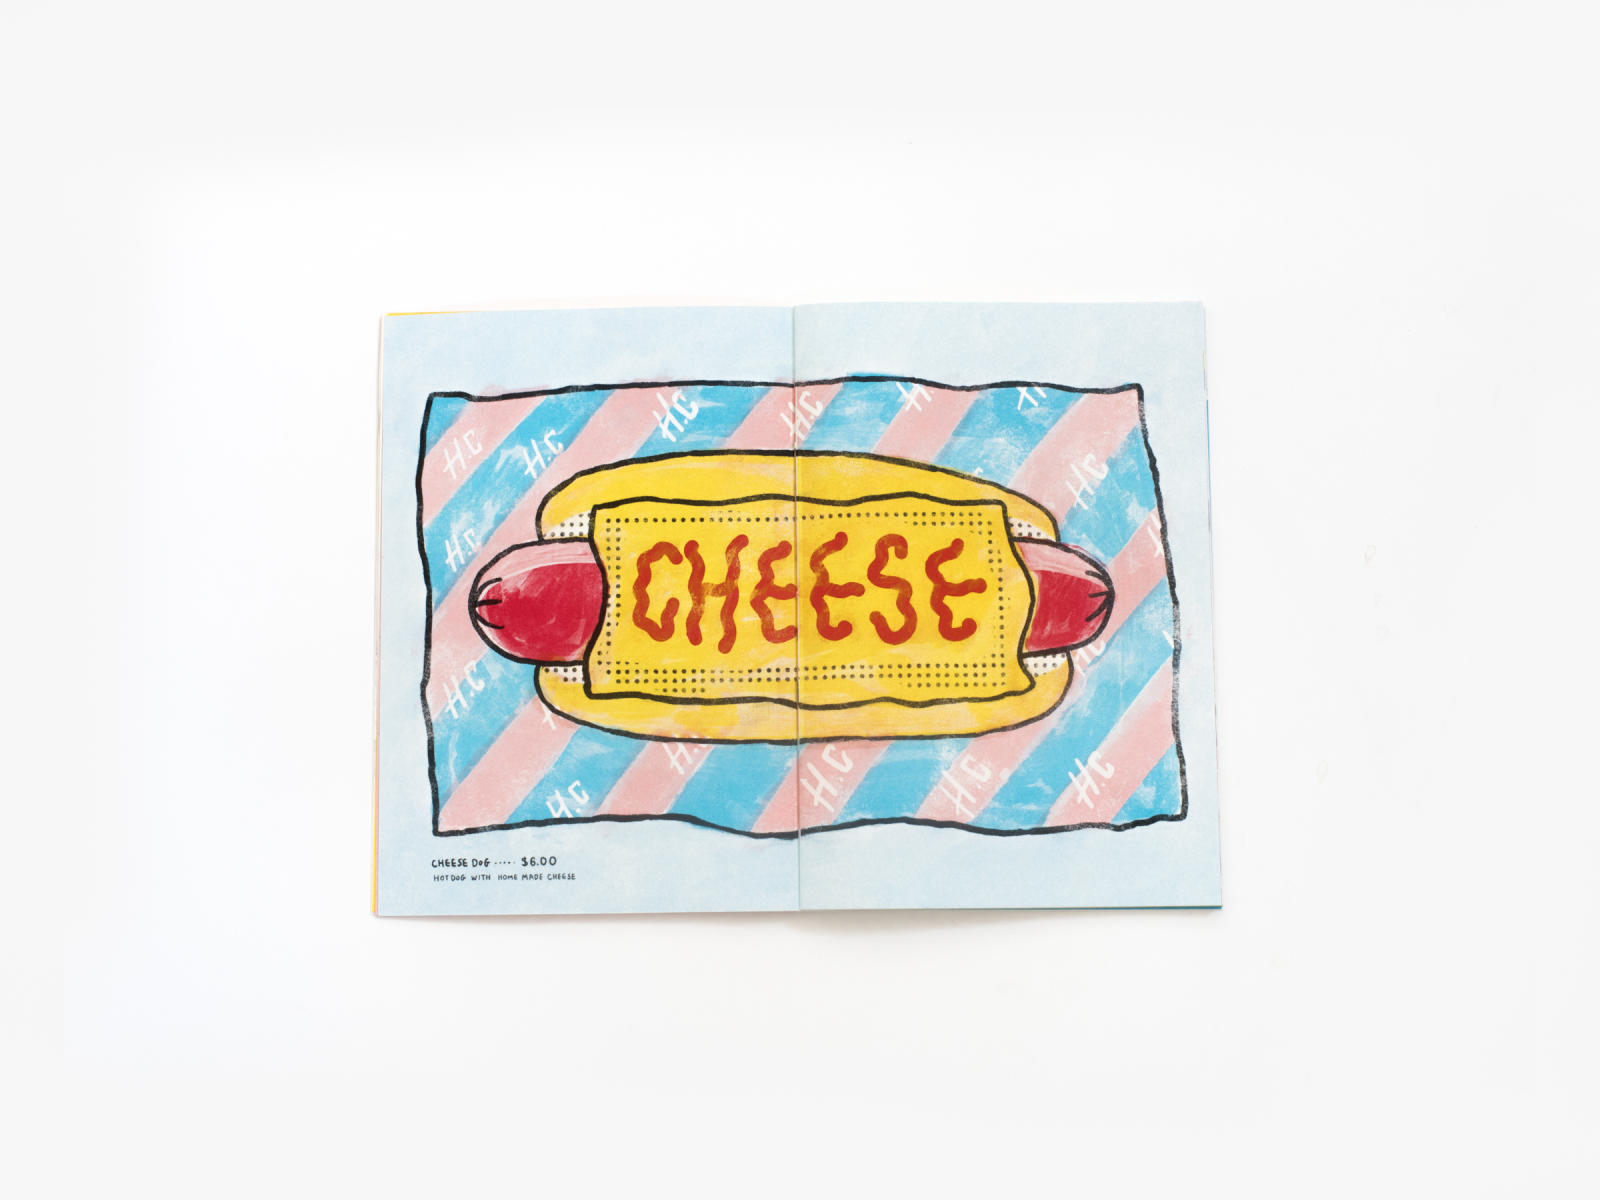 Cheese hot dog graphic with artistic text.